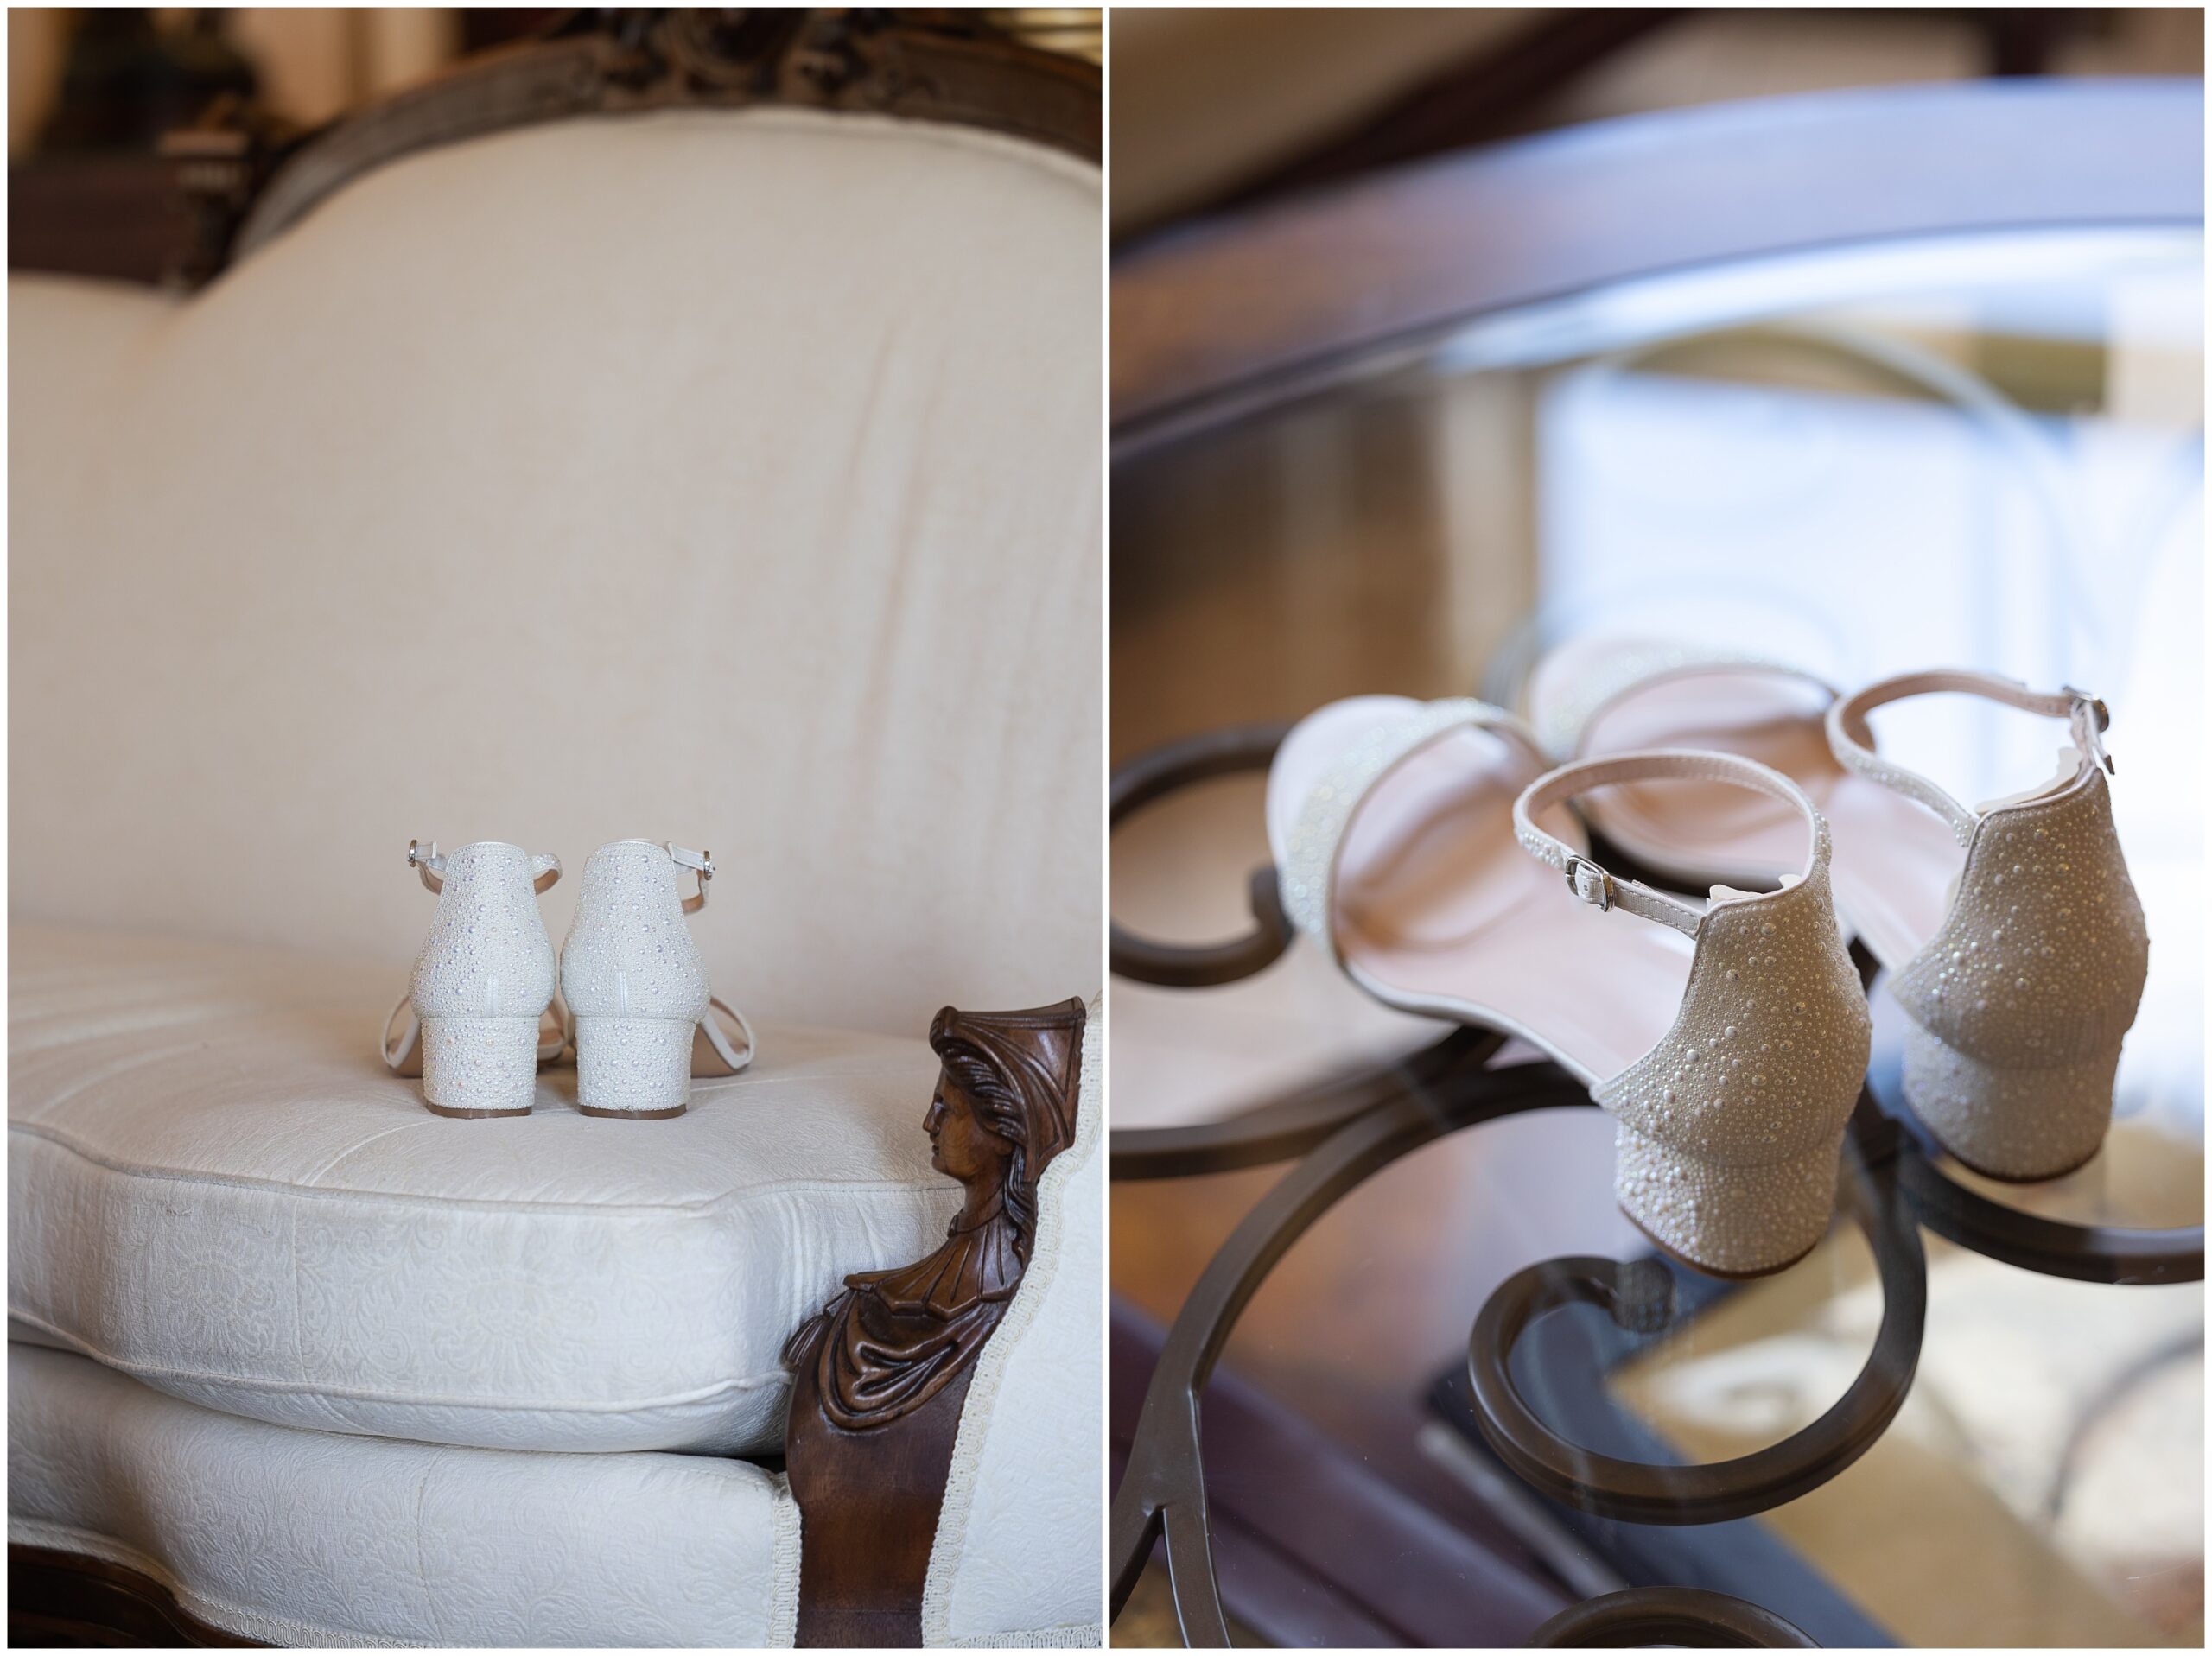 Frank H. Buhl Mansion Wedding in Sharon PA Photographed by Pittsburgh Wedding Photographer Acevedo Weddings